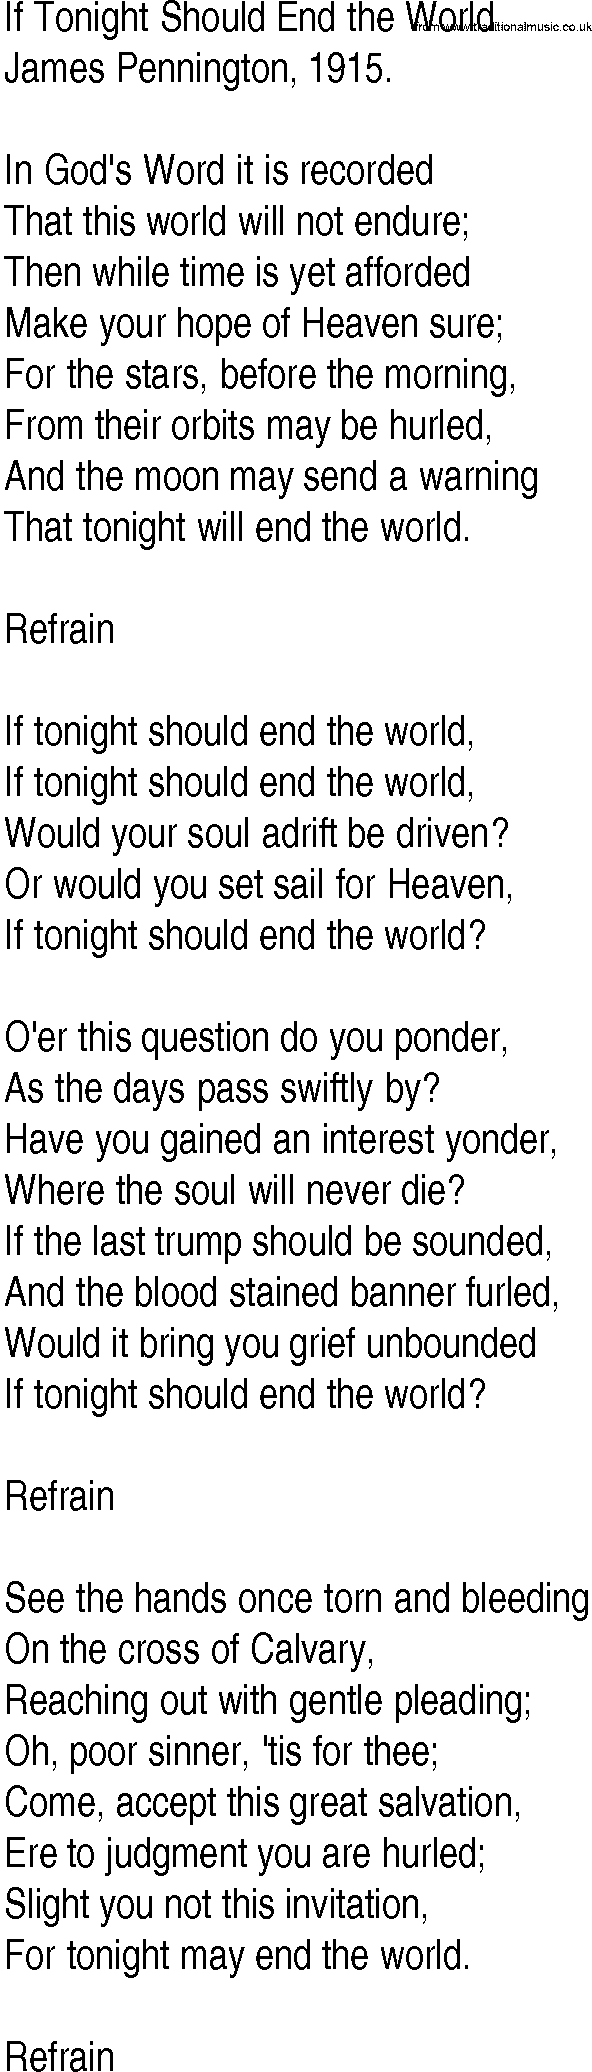 Hymn and Gospel Song: If Tonight Should End the World by James Pennington lyrics